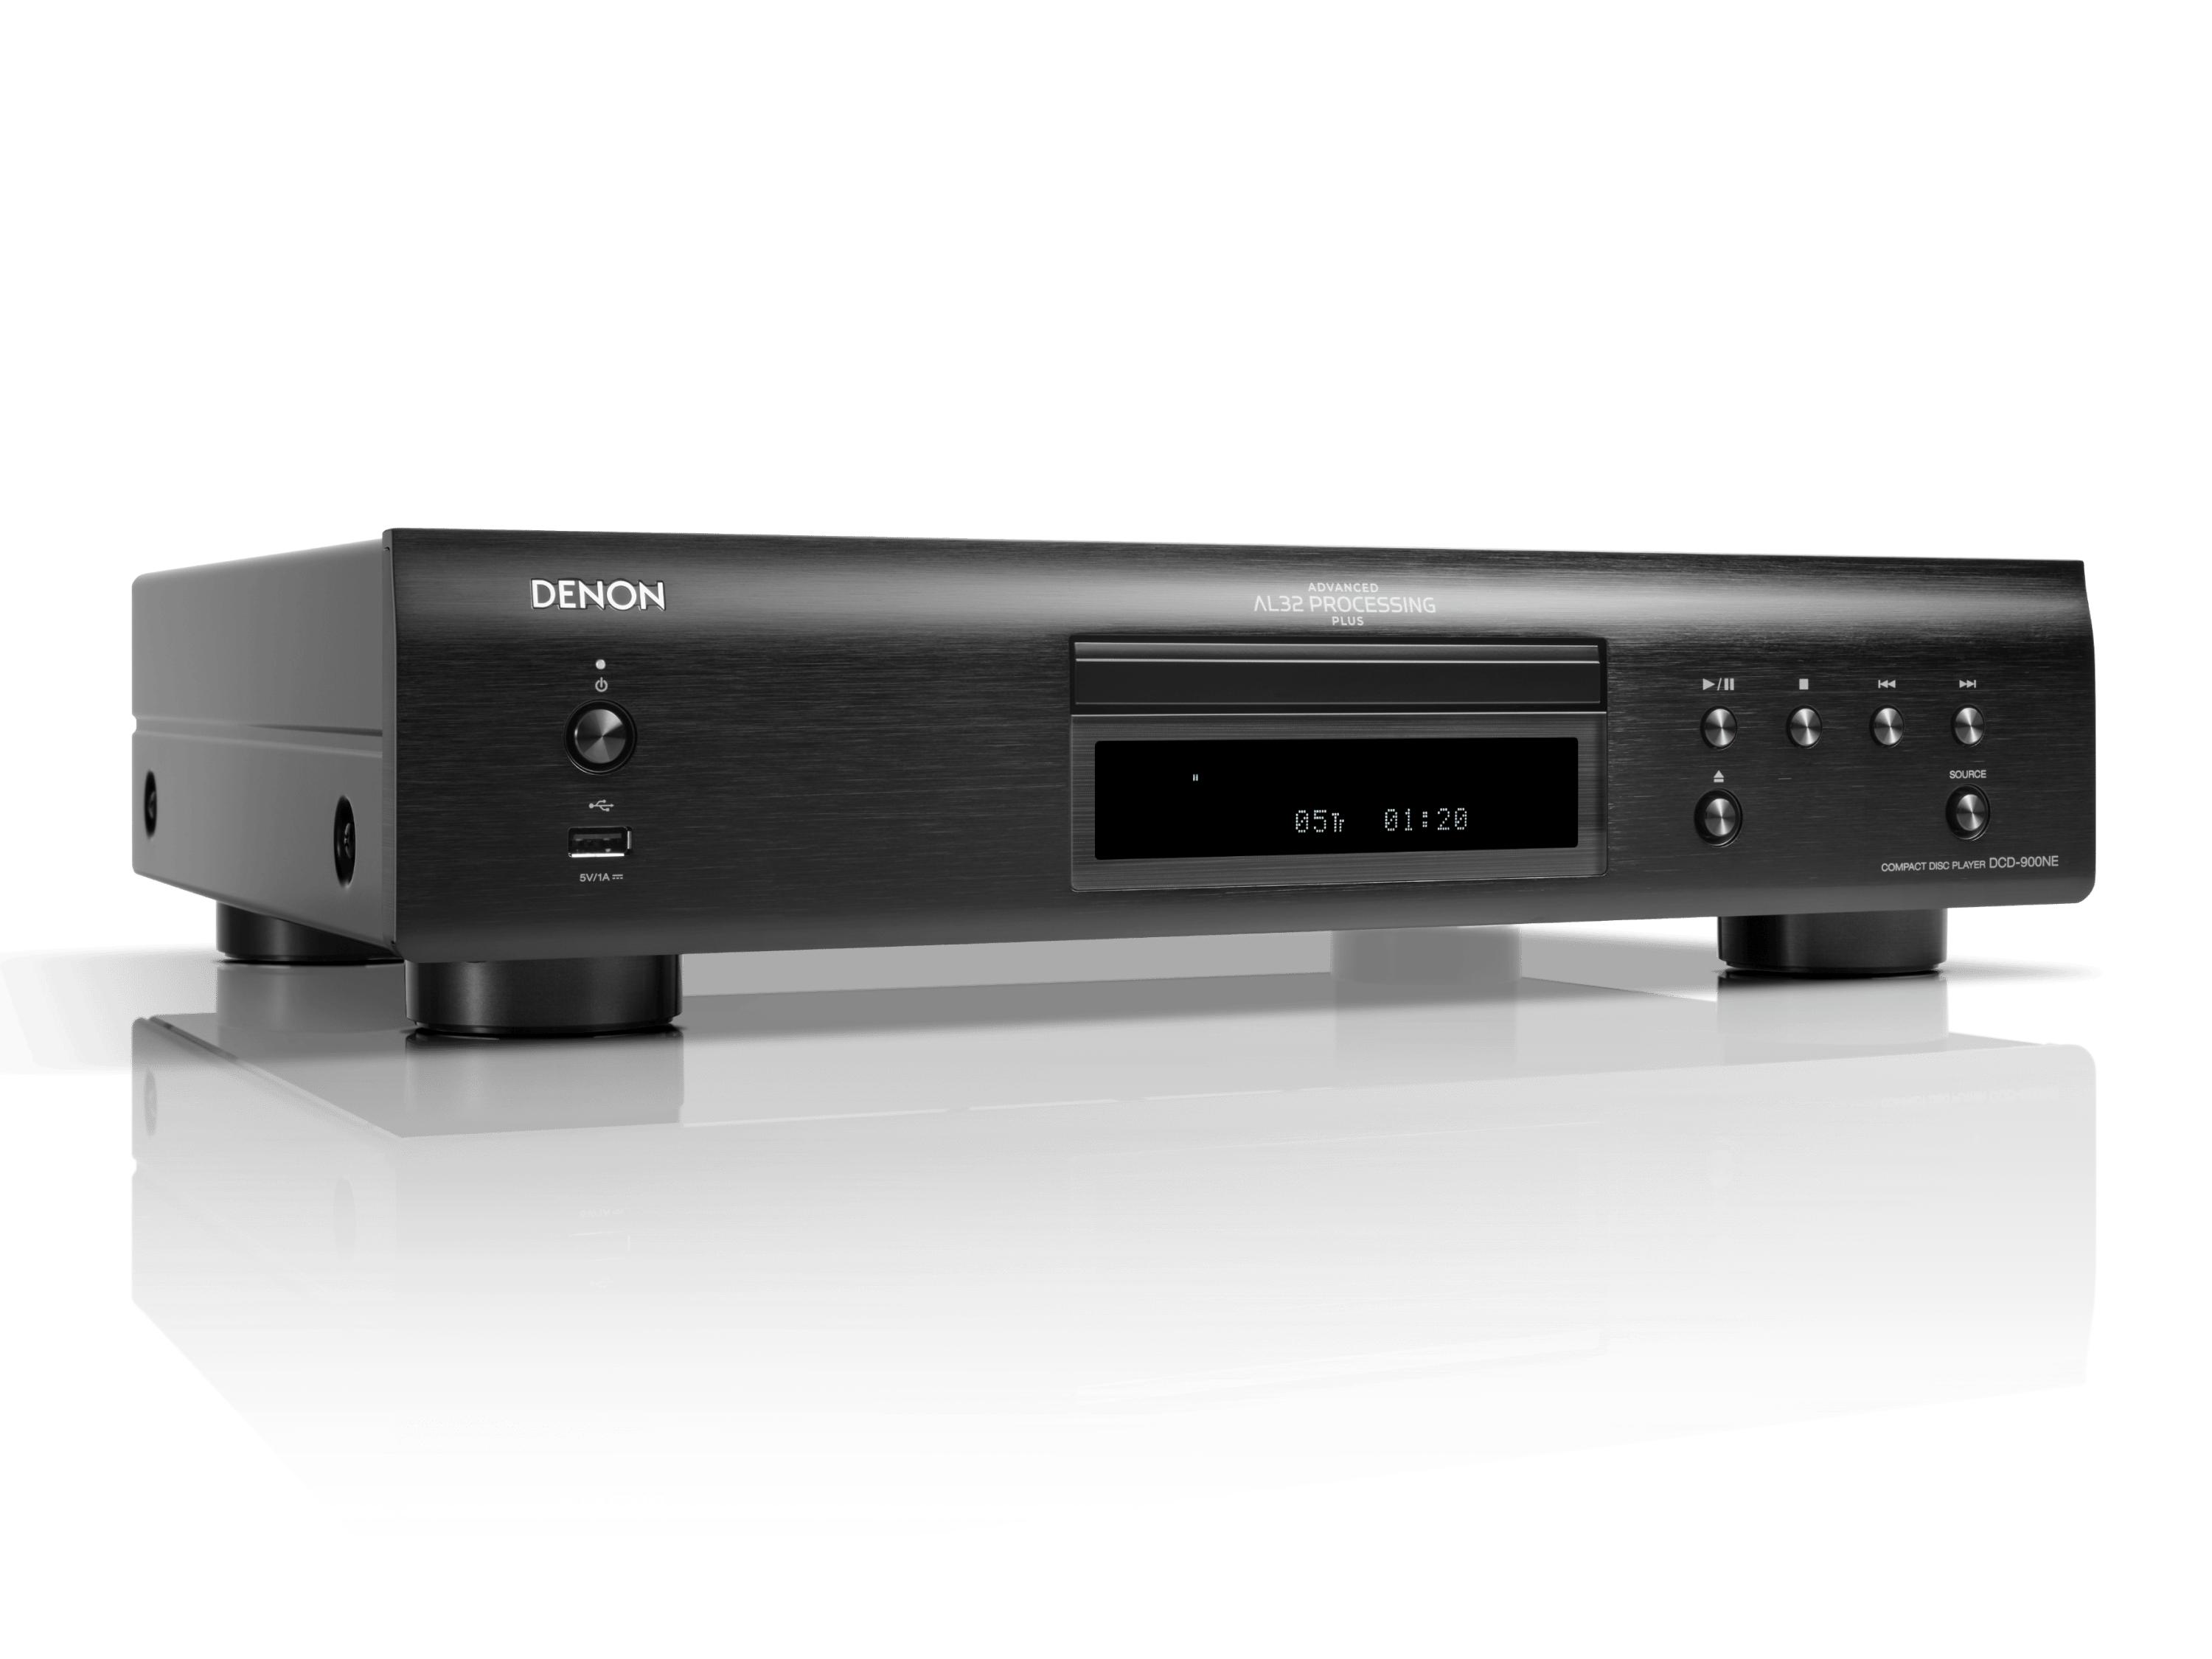 DCD-900NE - CD Player with Advanced AL32 Processing Plus and USB